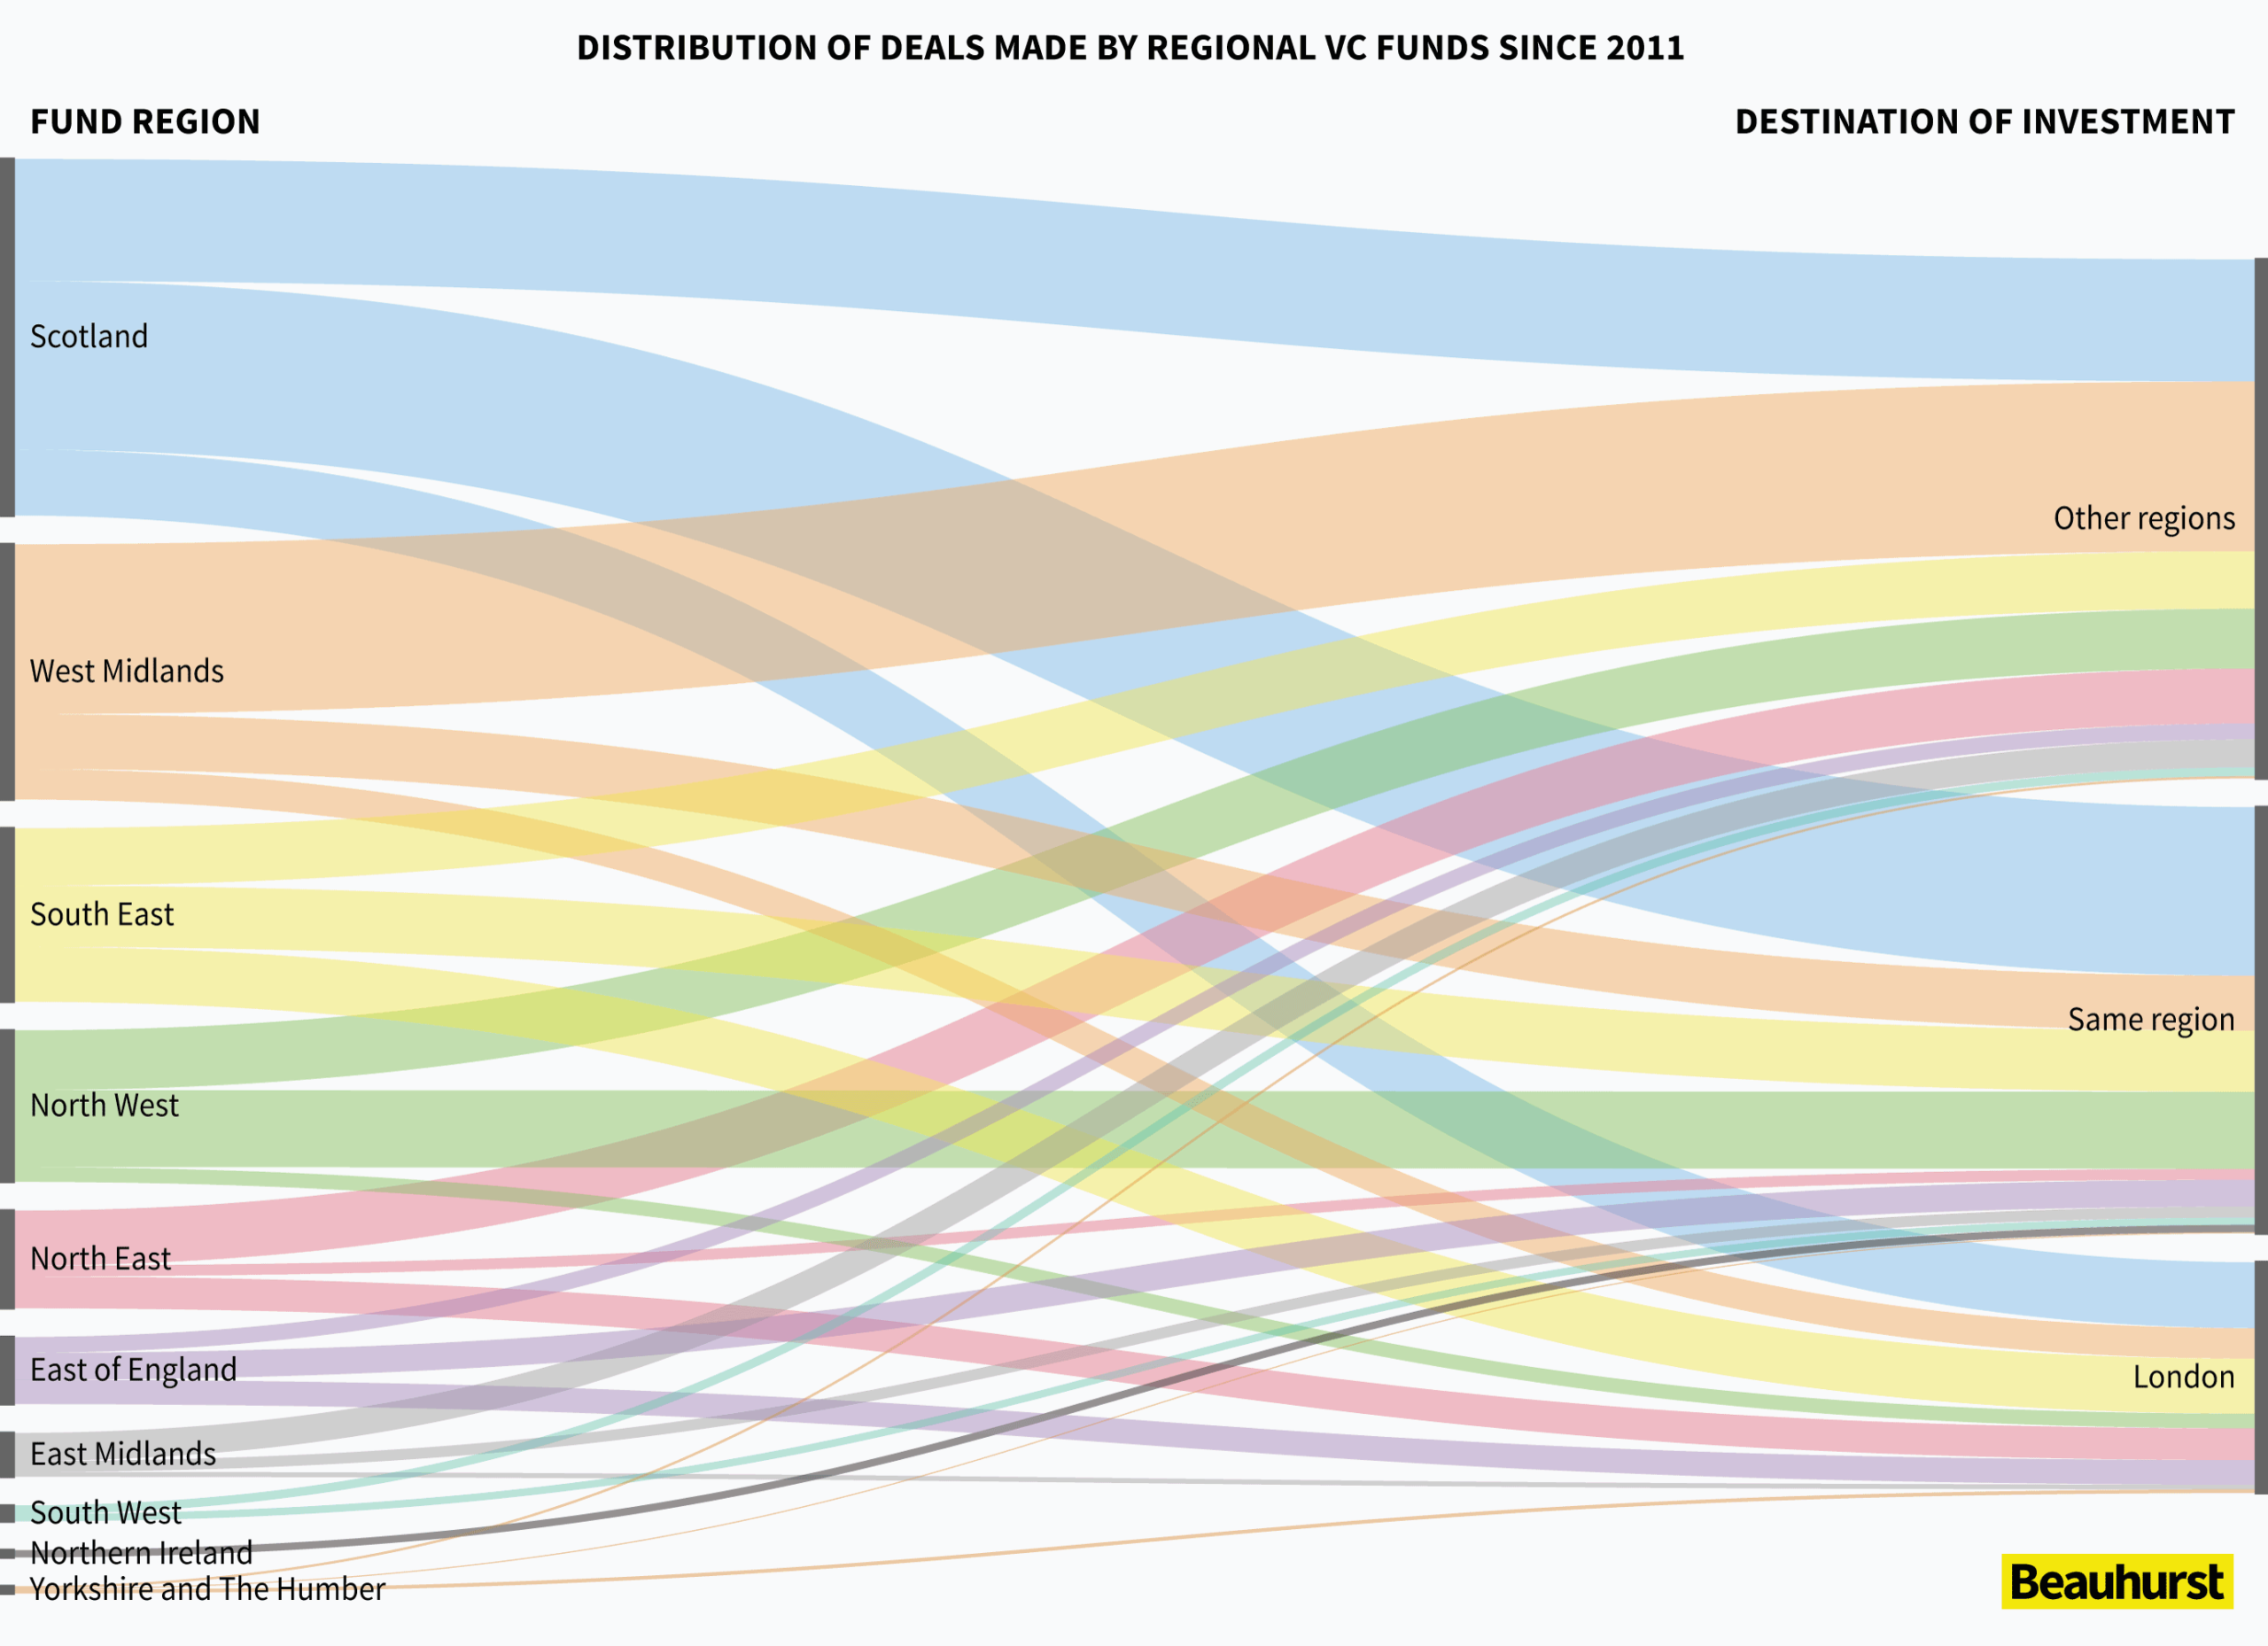 Distribution of deals made by regional vc funds uk since 2011